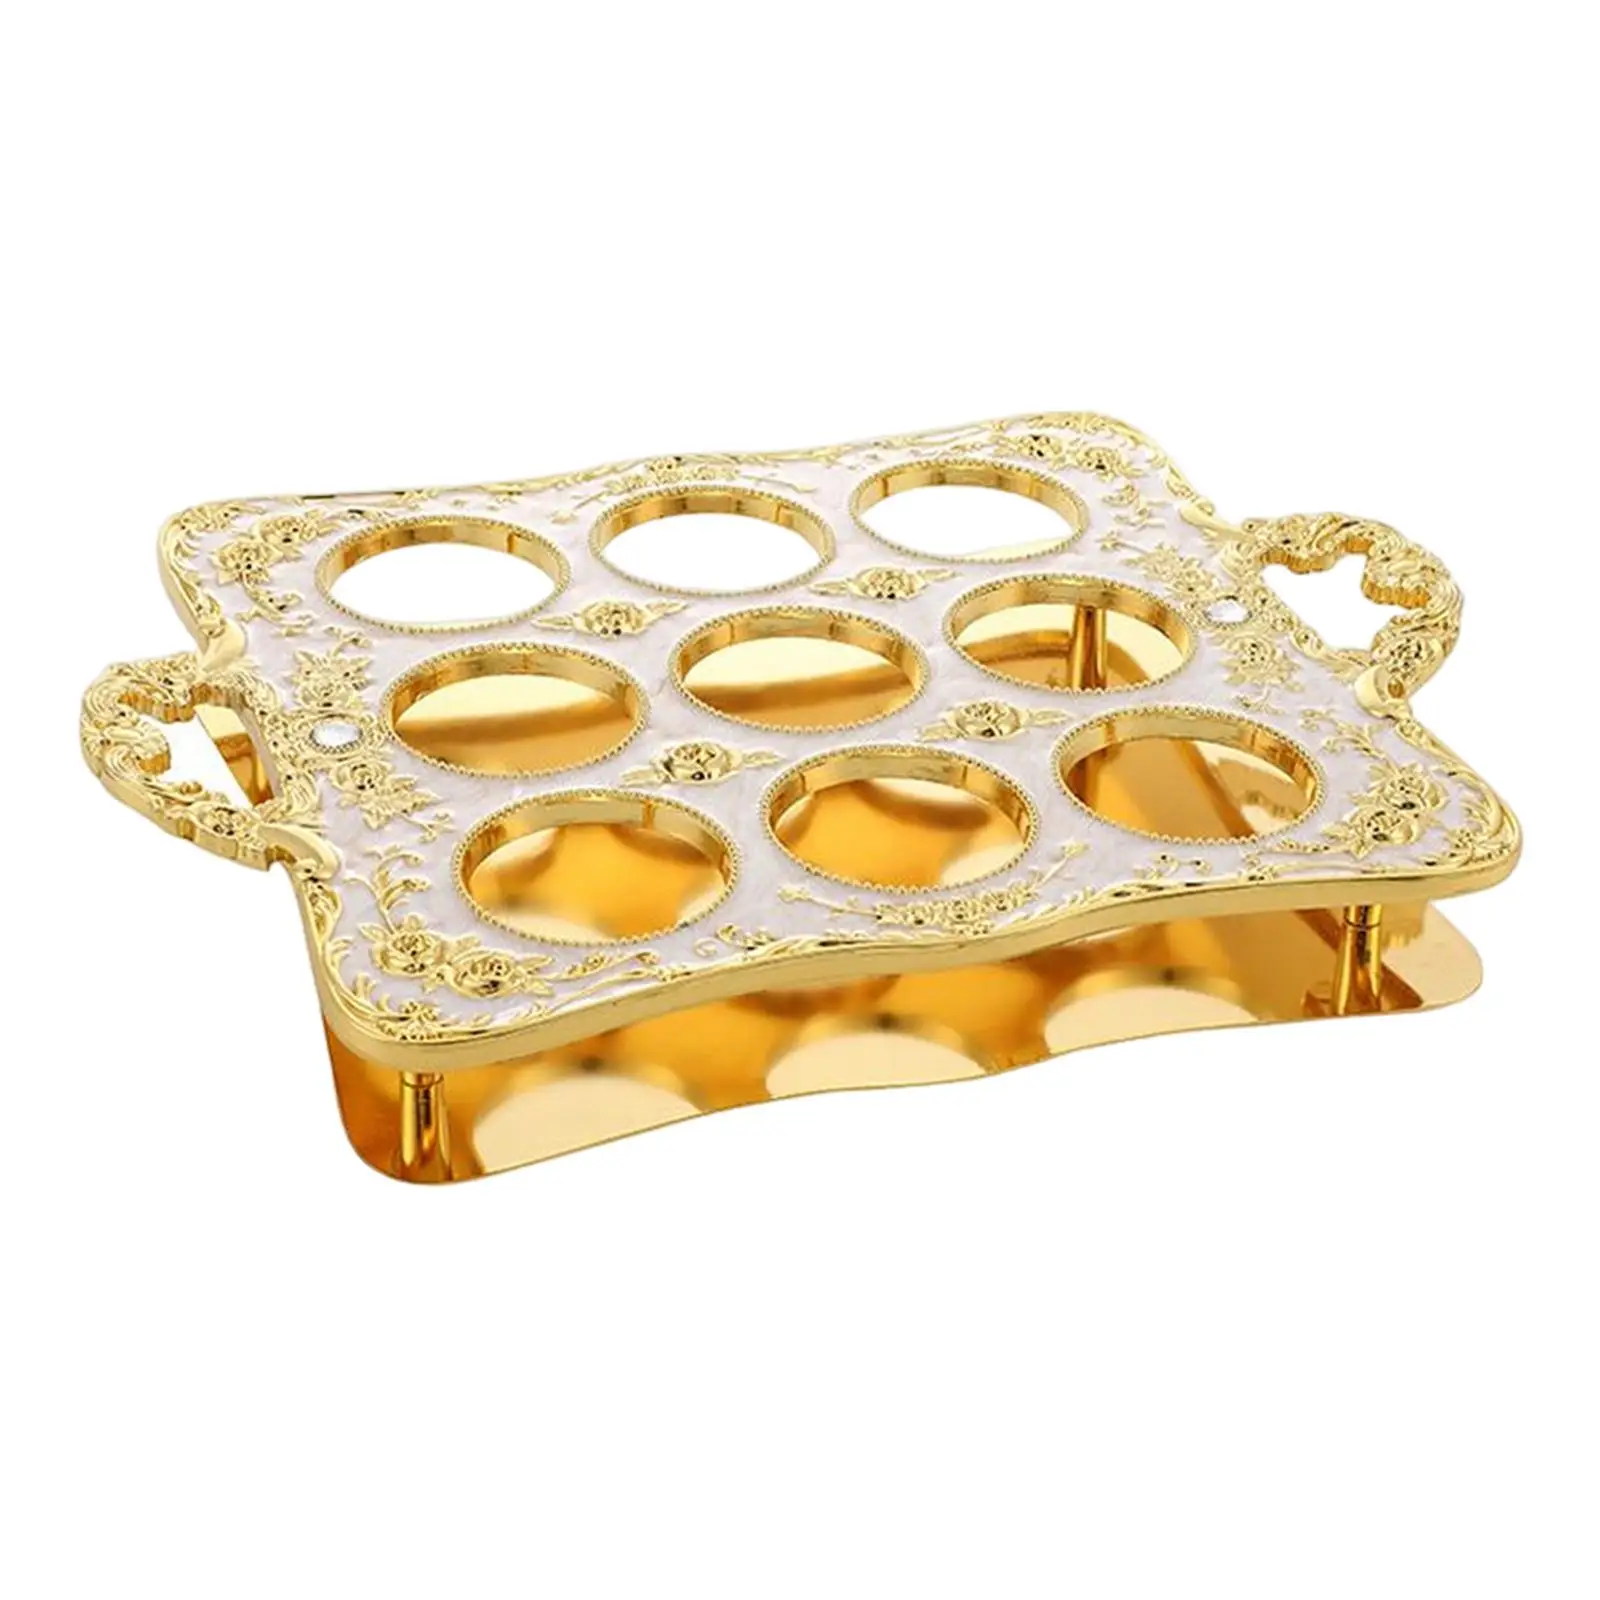 Aluminum Alloy 9 Holes Water Cup Holder Tray Platter for Restaurant